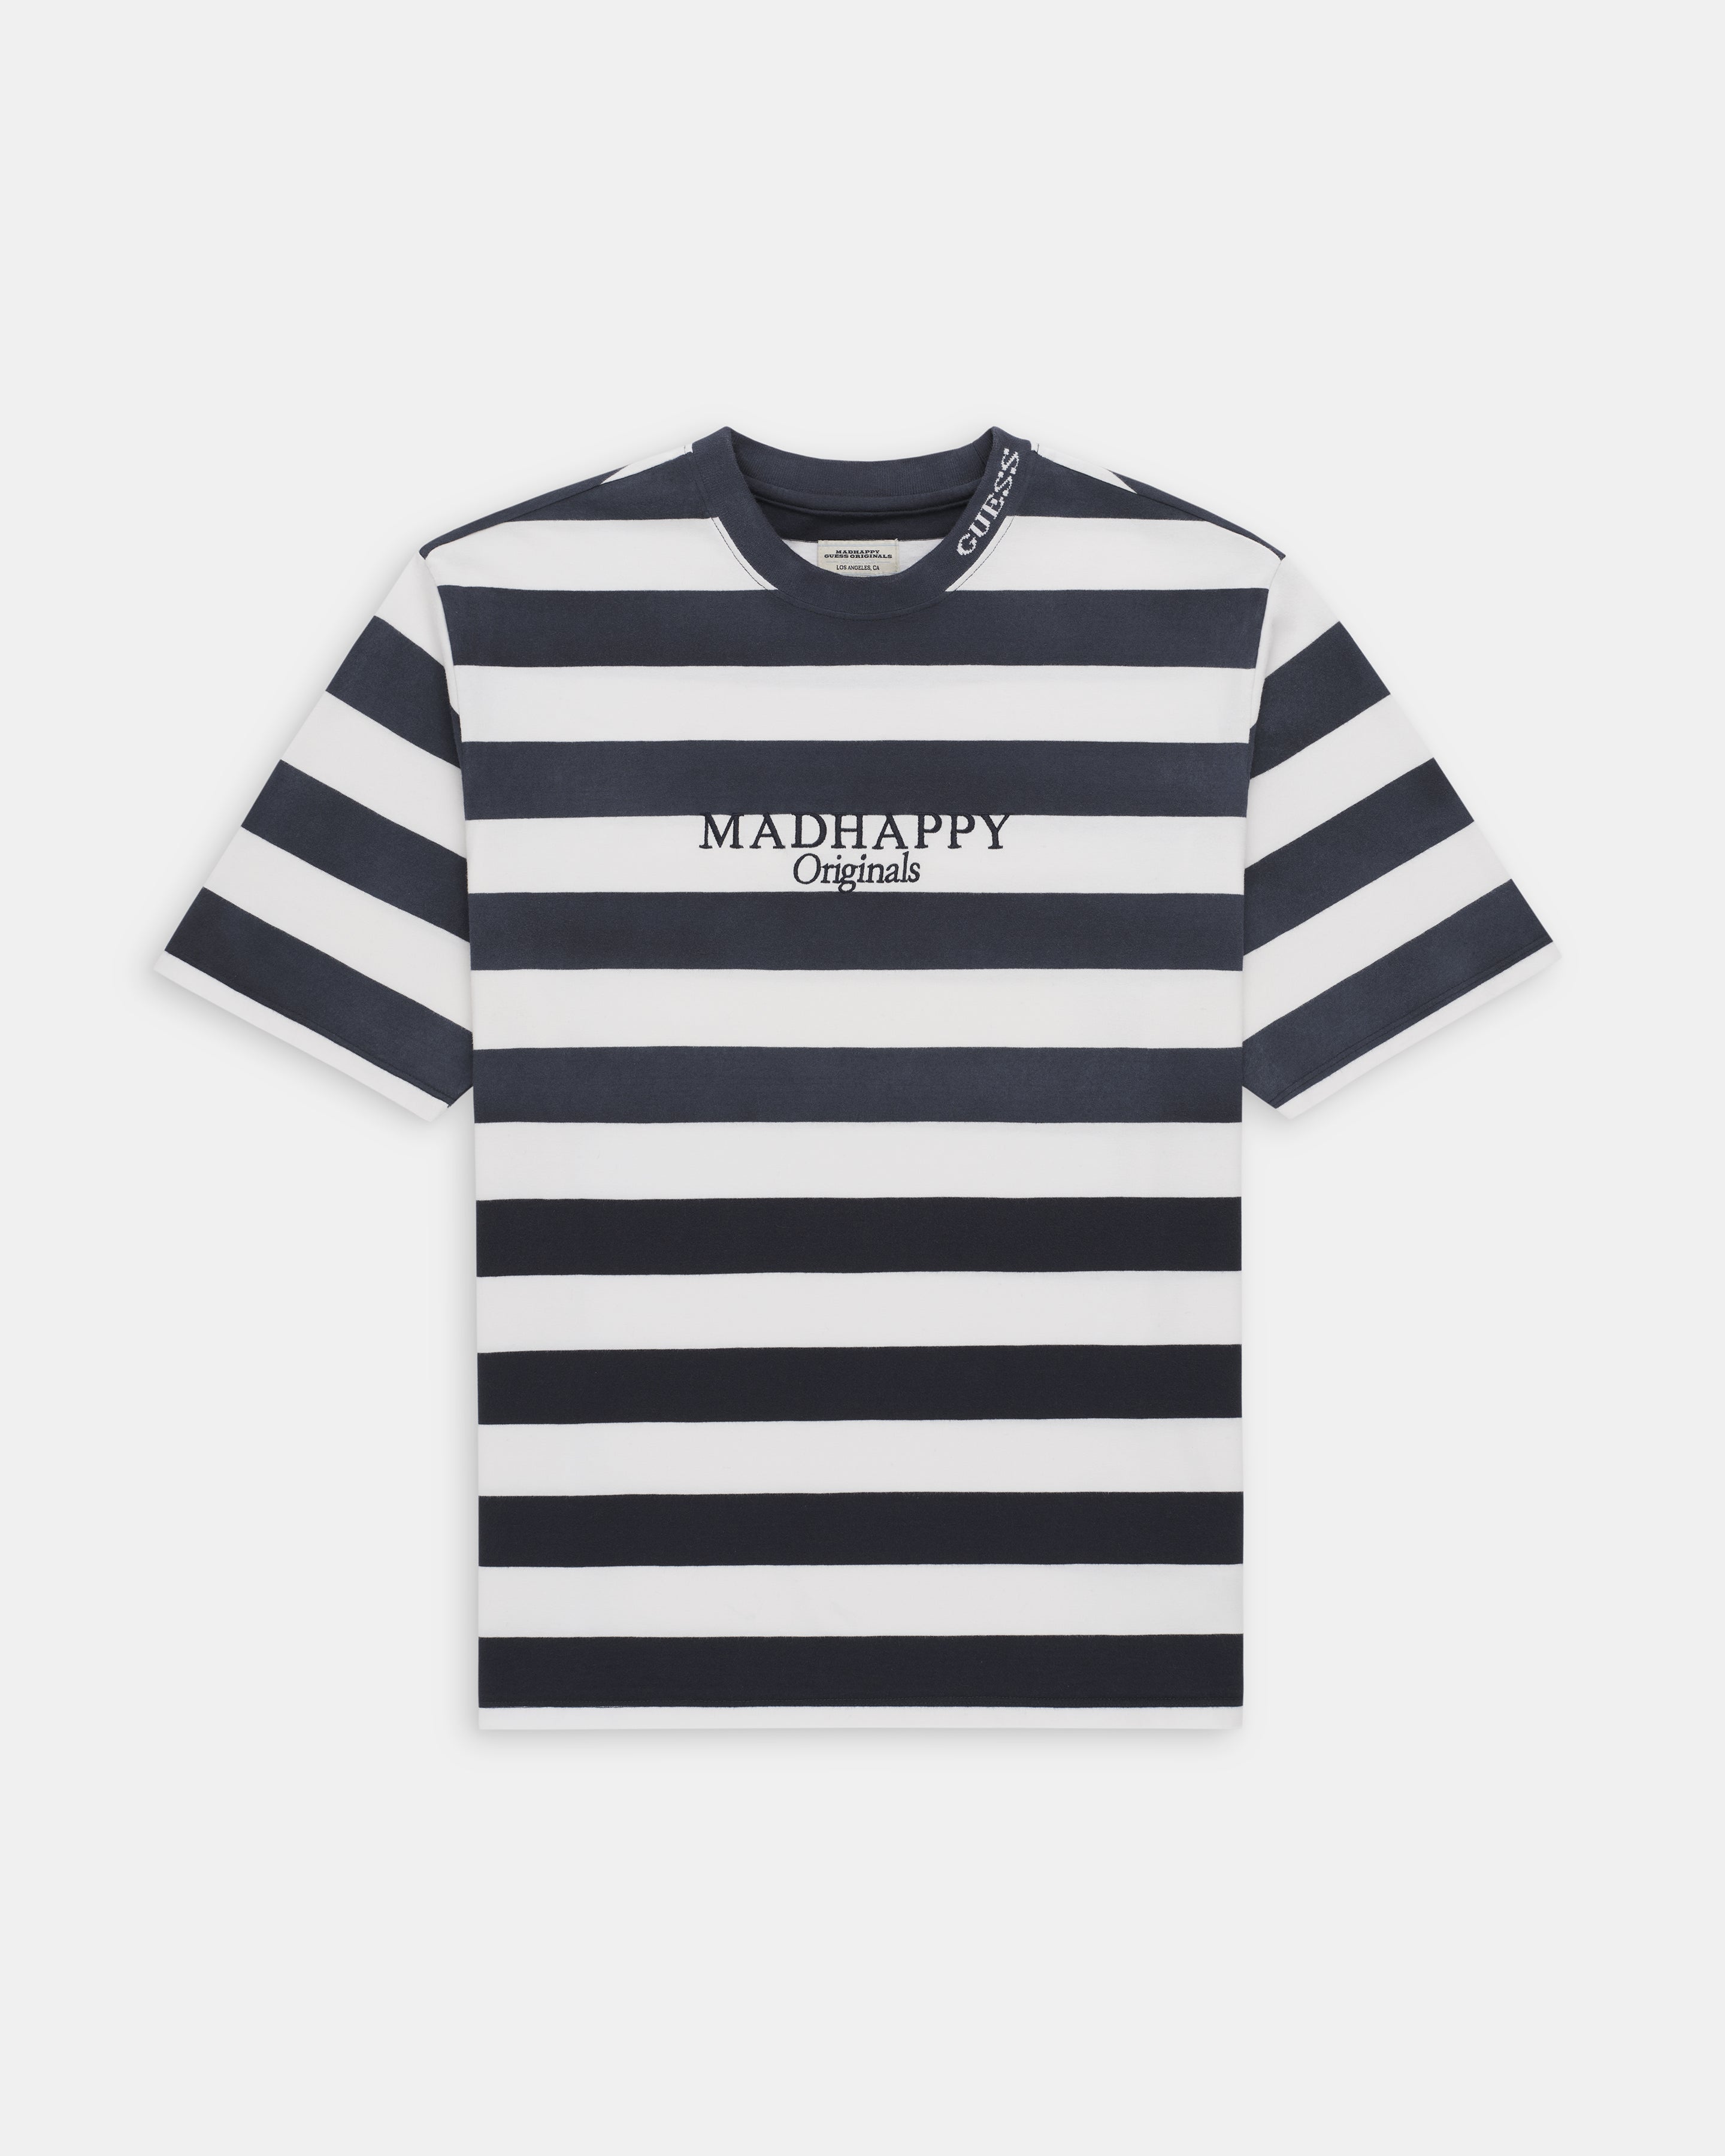 Guess Striped Tee Madhappy